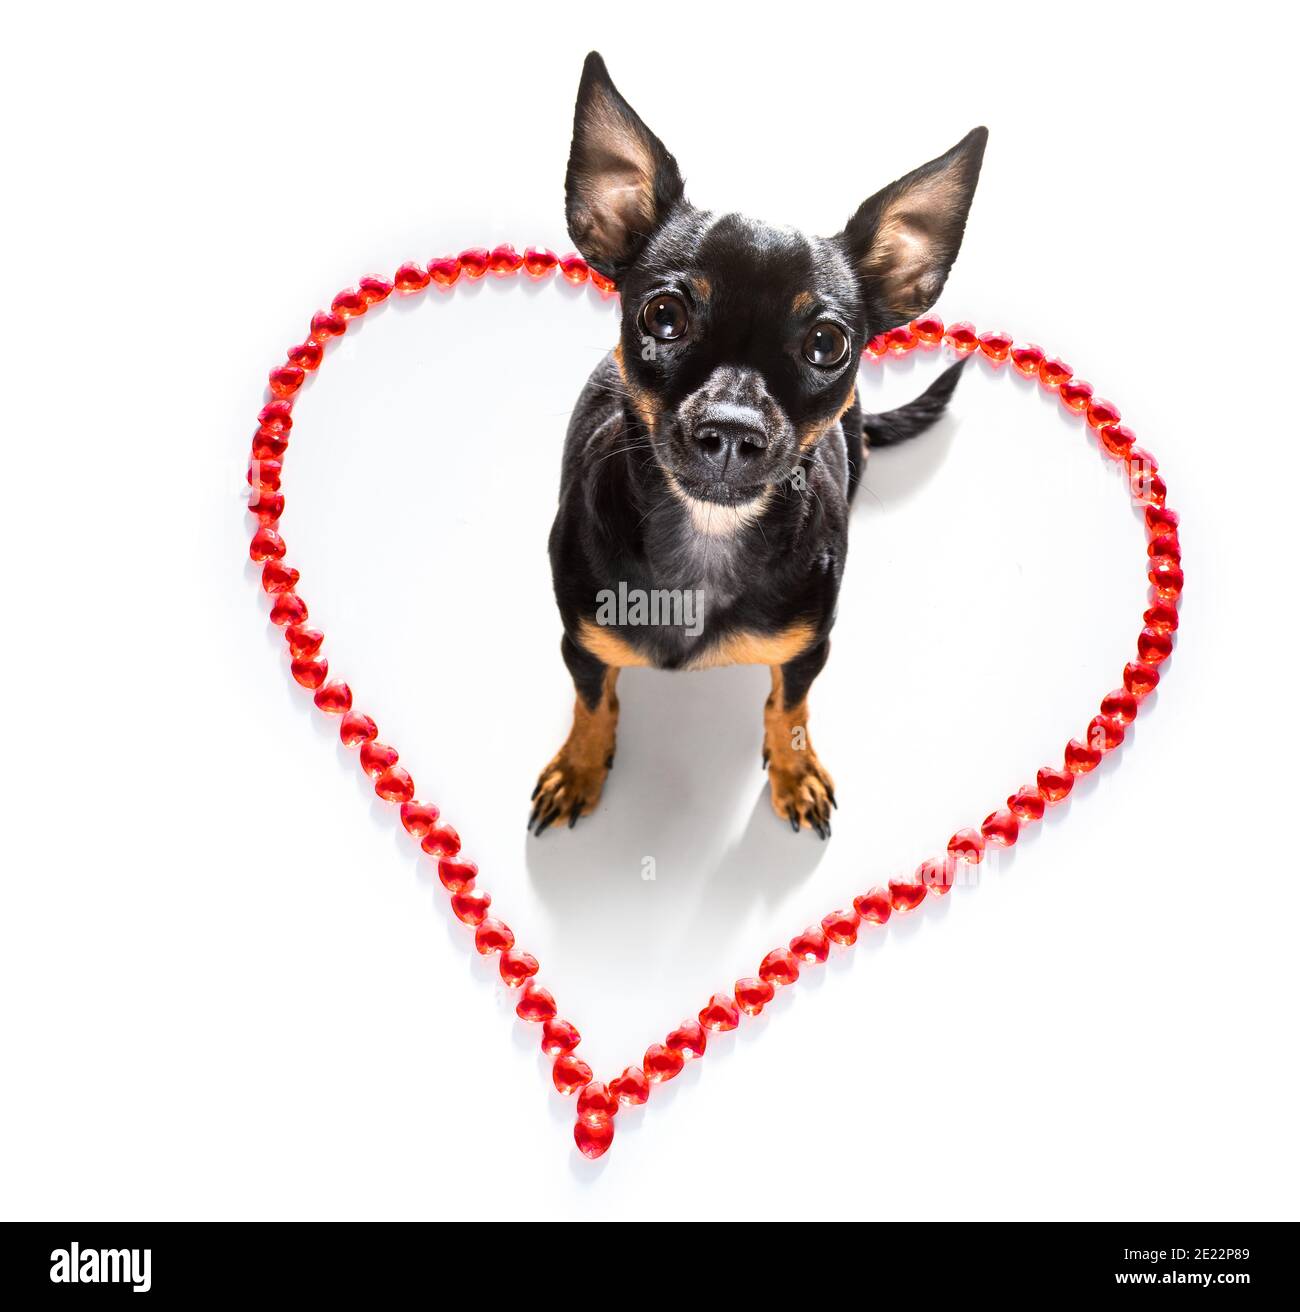 prague ratter dog on valentines love heart shape with I love you sign as background isolated on white Stock Photo